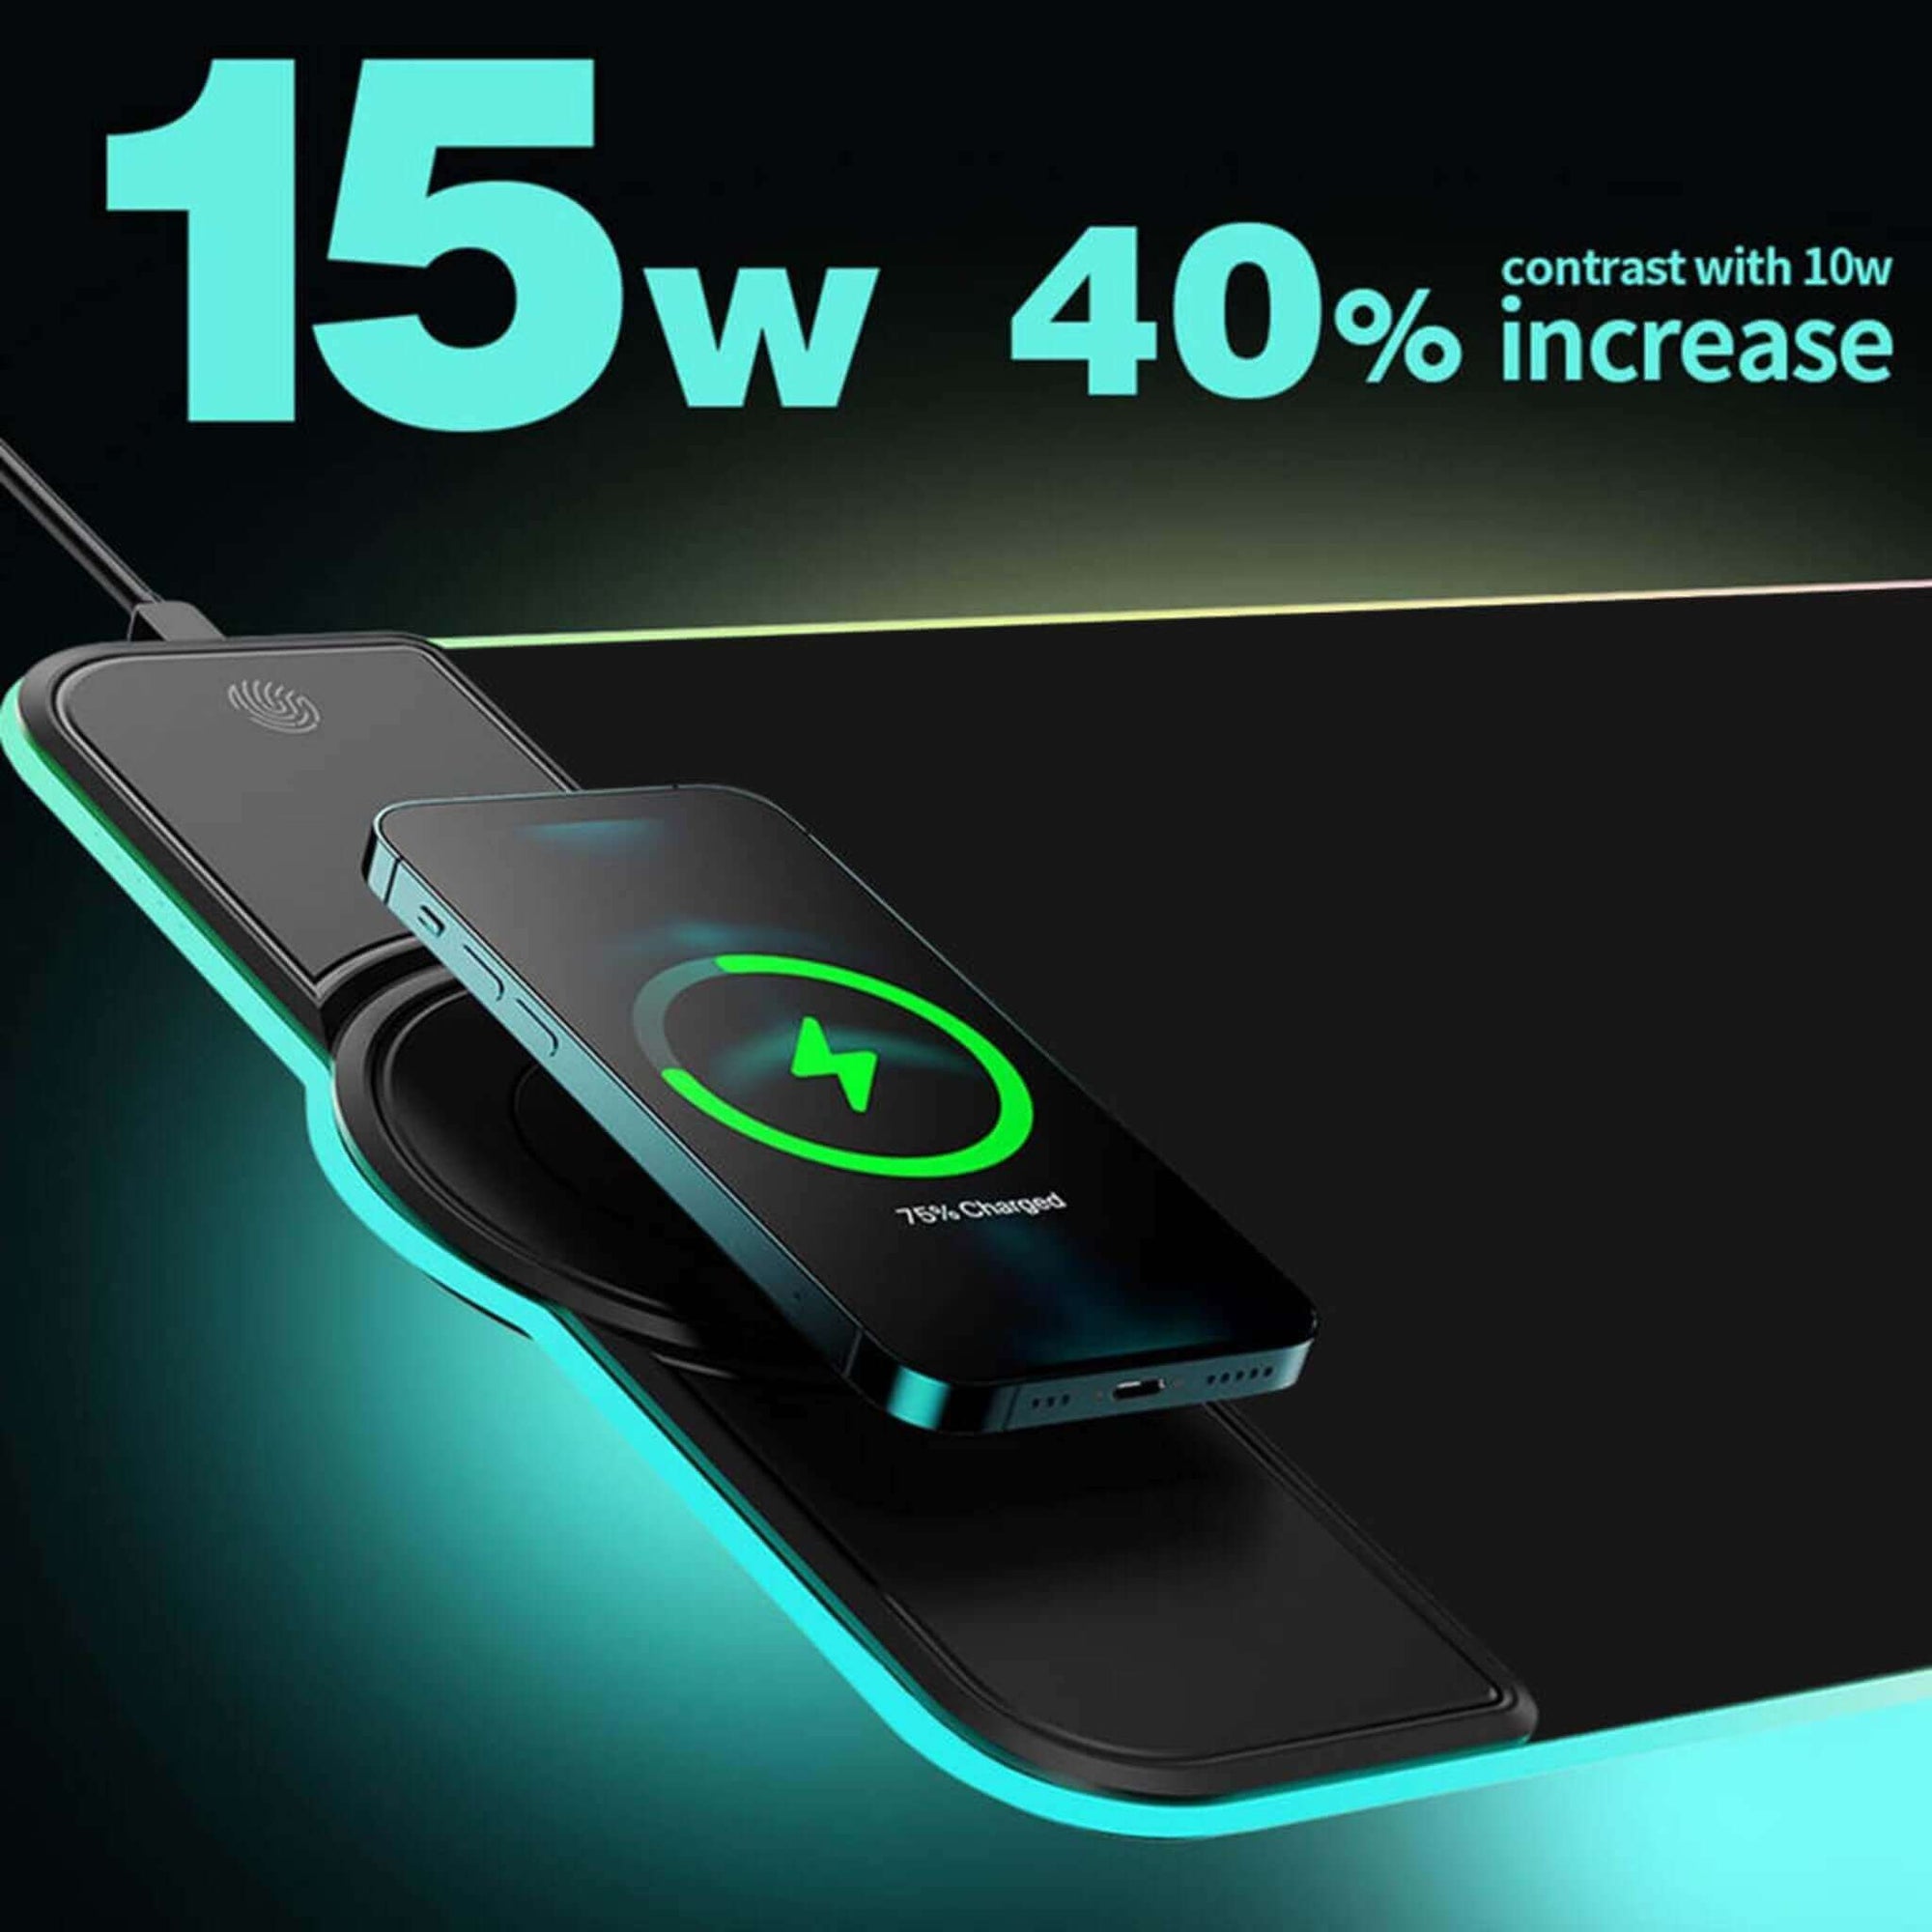 15w wireless charging feature of the Black Obsidian Desk Mat for iPhone models